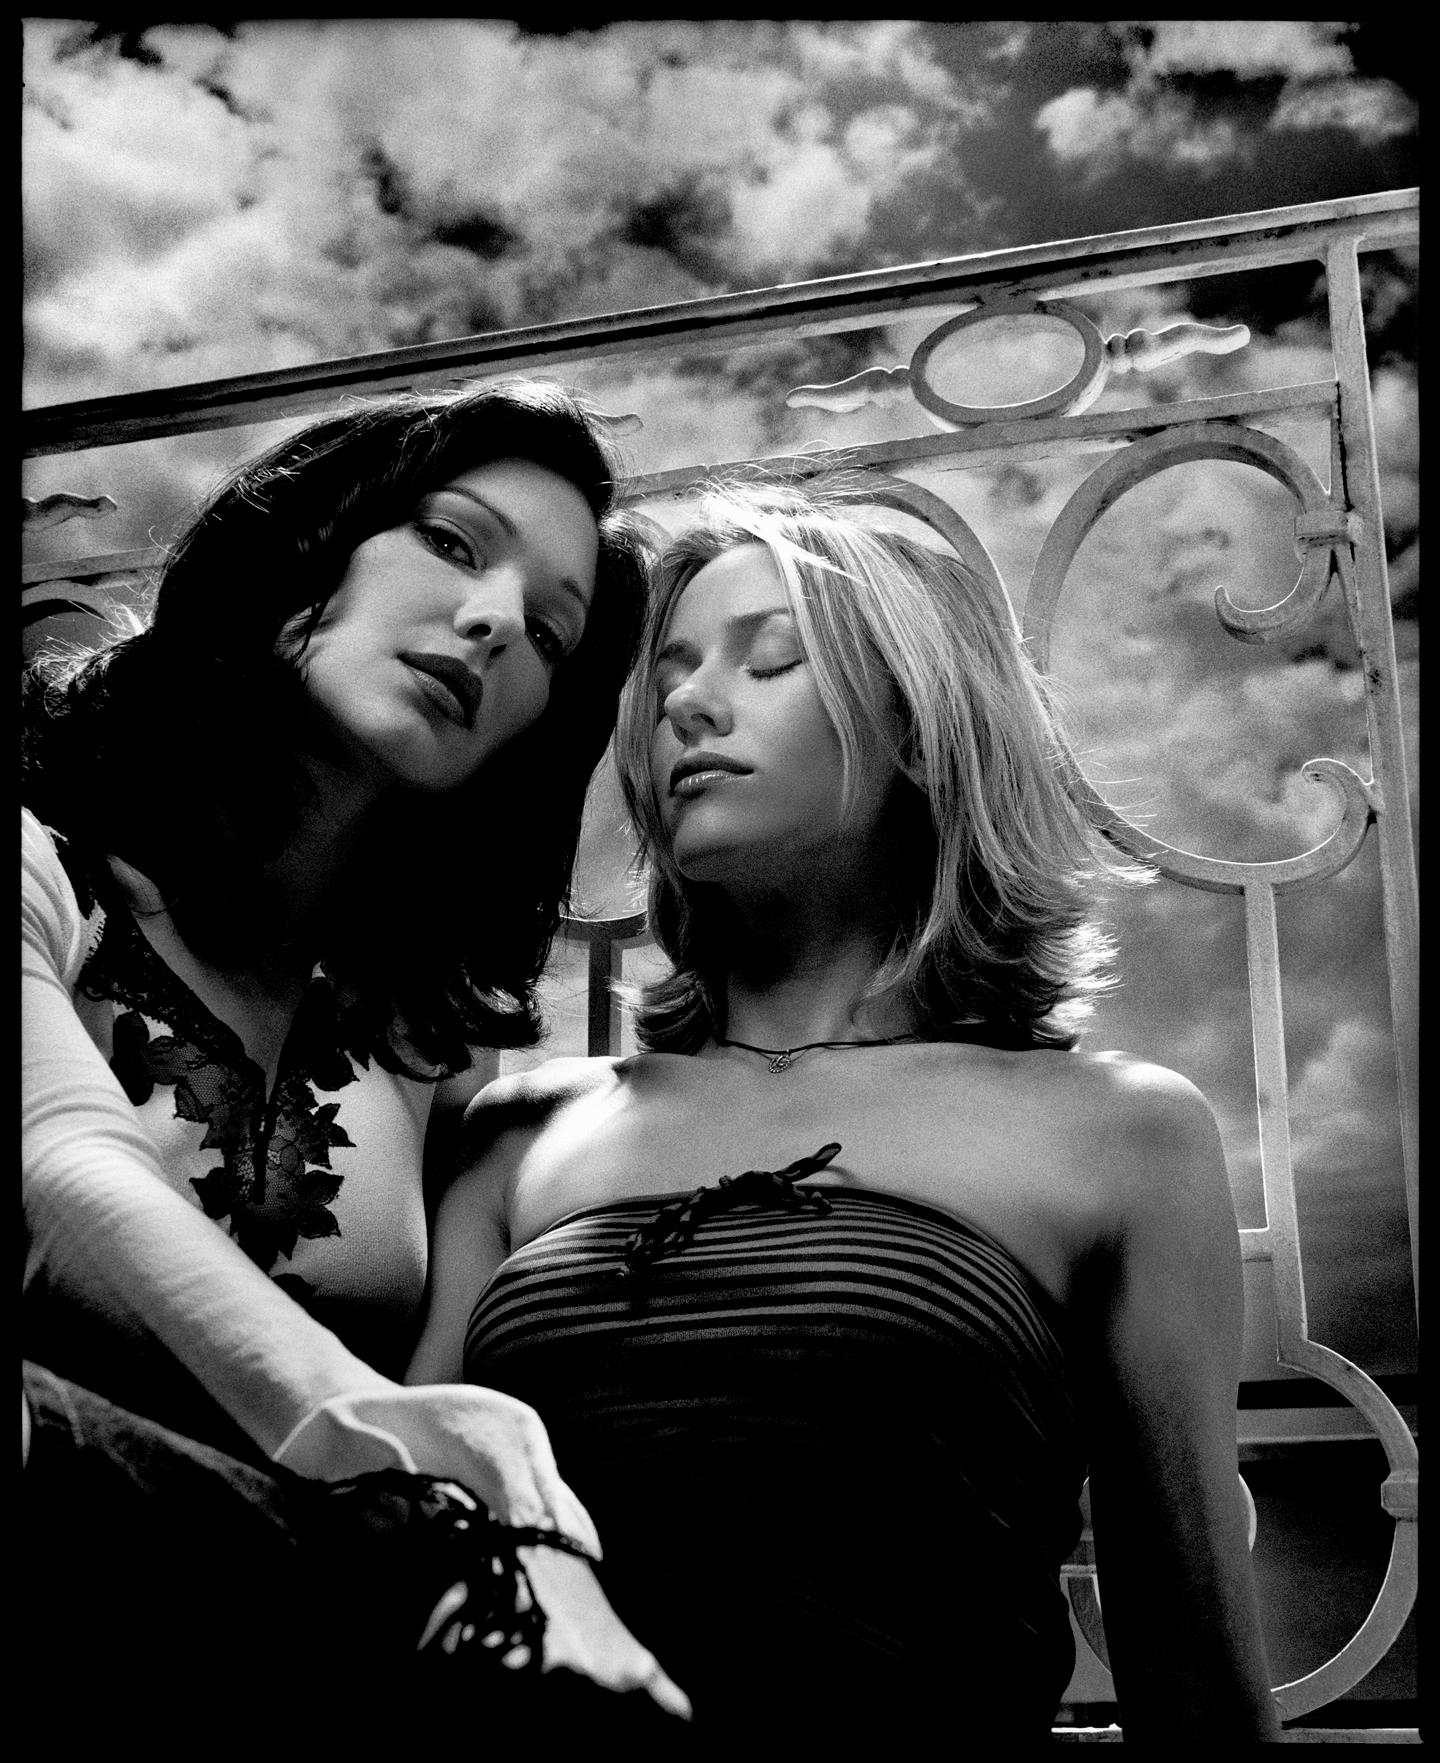 Laura and Naomi 

1997

by Kevin Westenberg
Signed Limited Edition

Kevin Westenberg is famed for his creation of provocative and electrifying images of world-class musicians, artists and movie stars for over 25 years.

His technique of lighting,